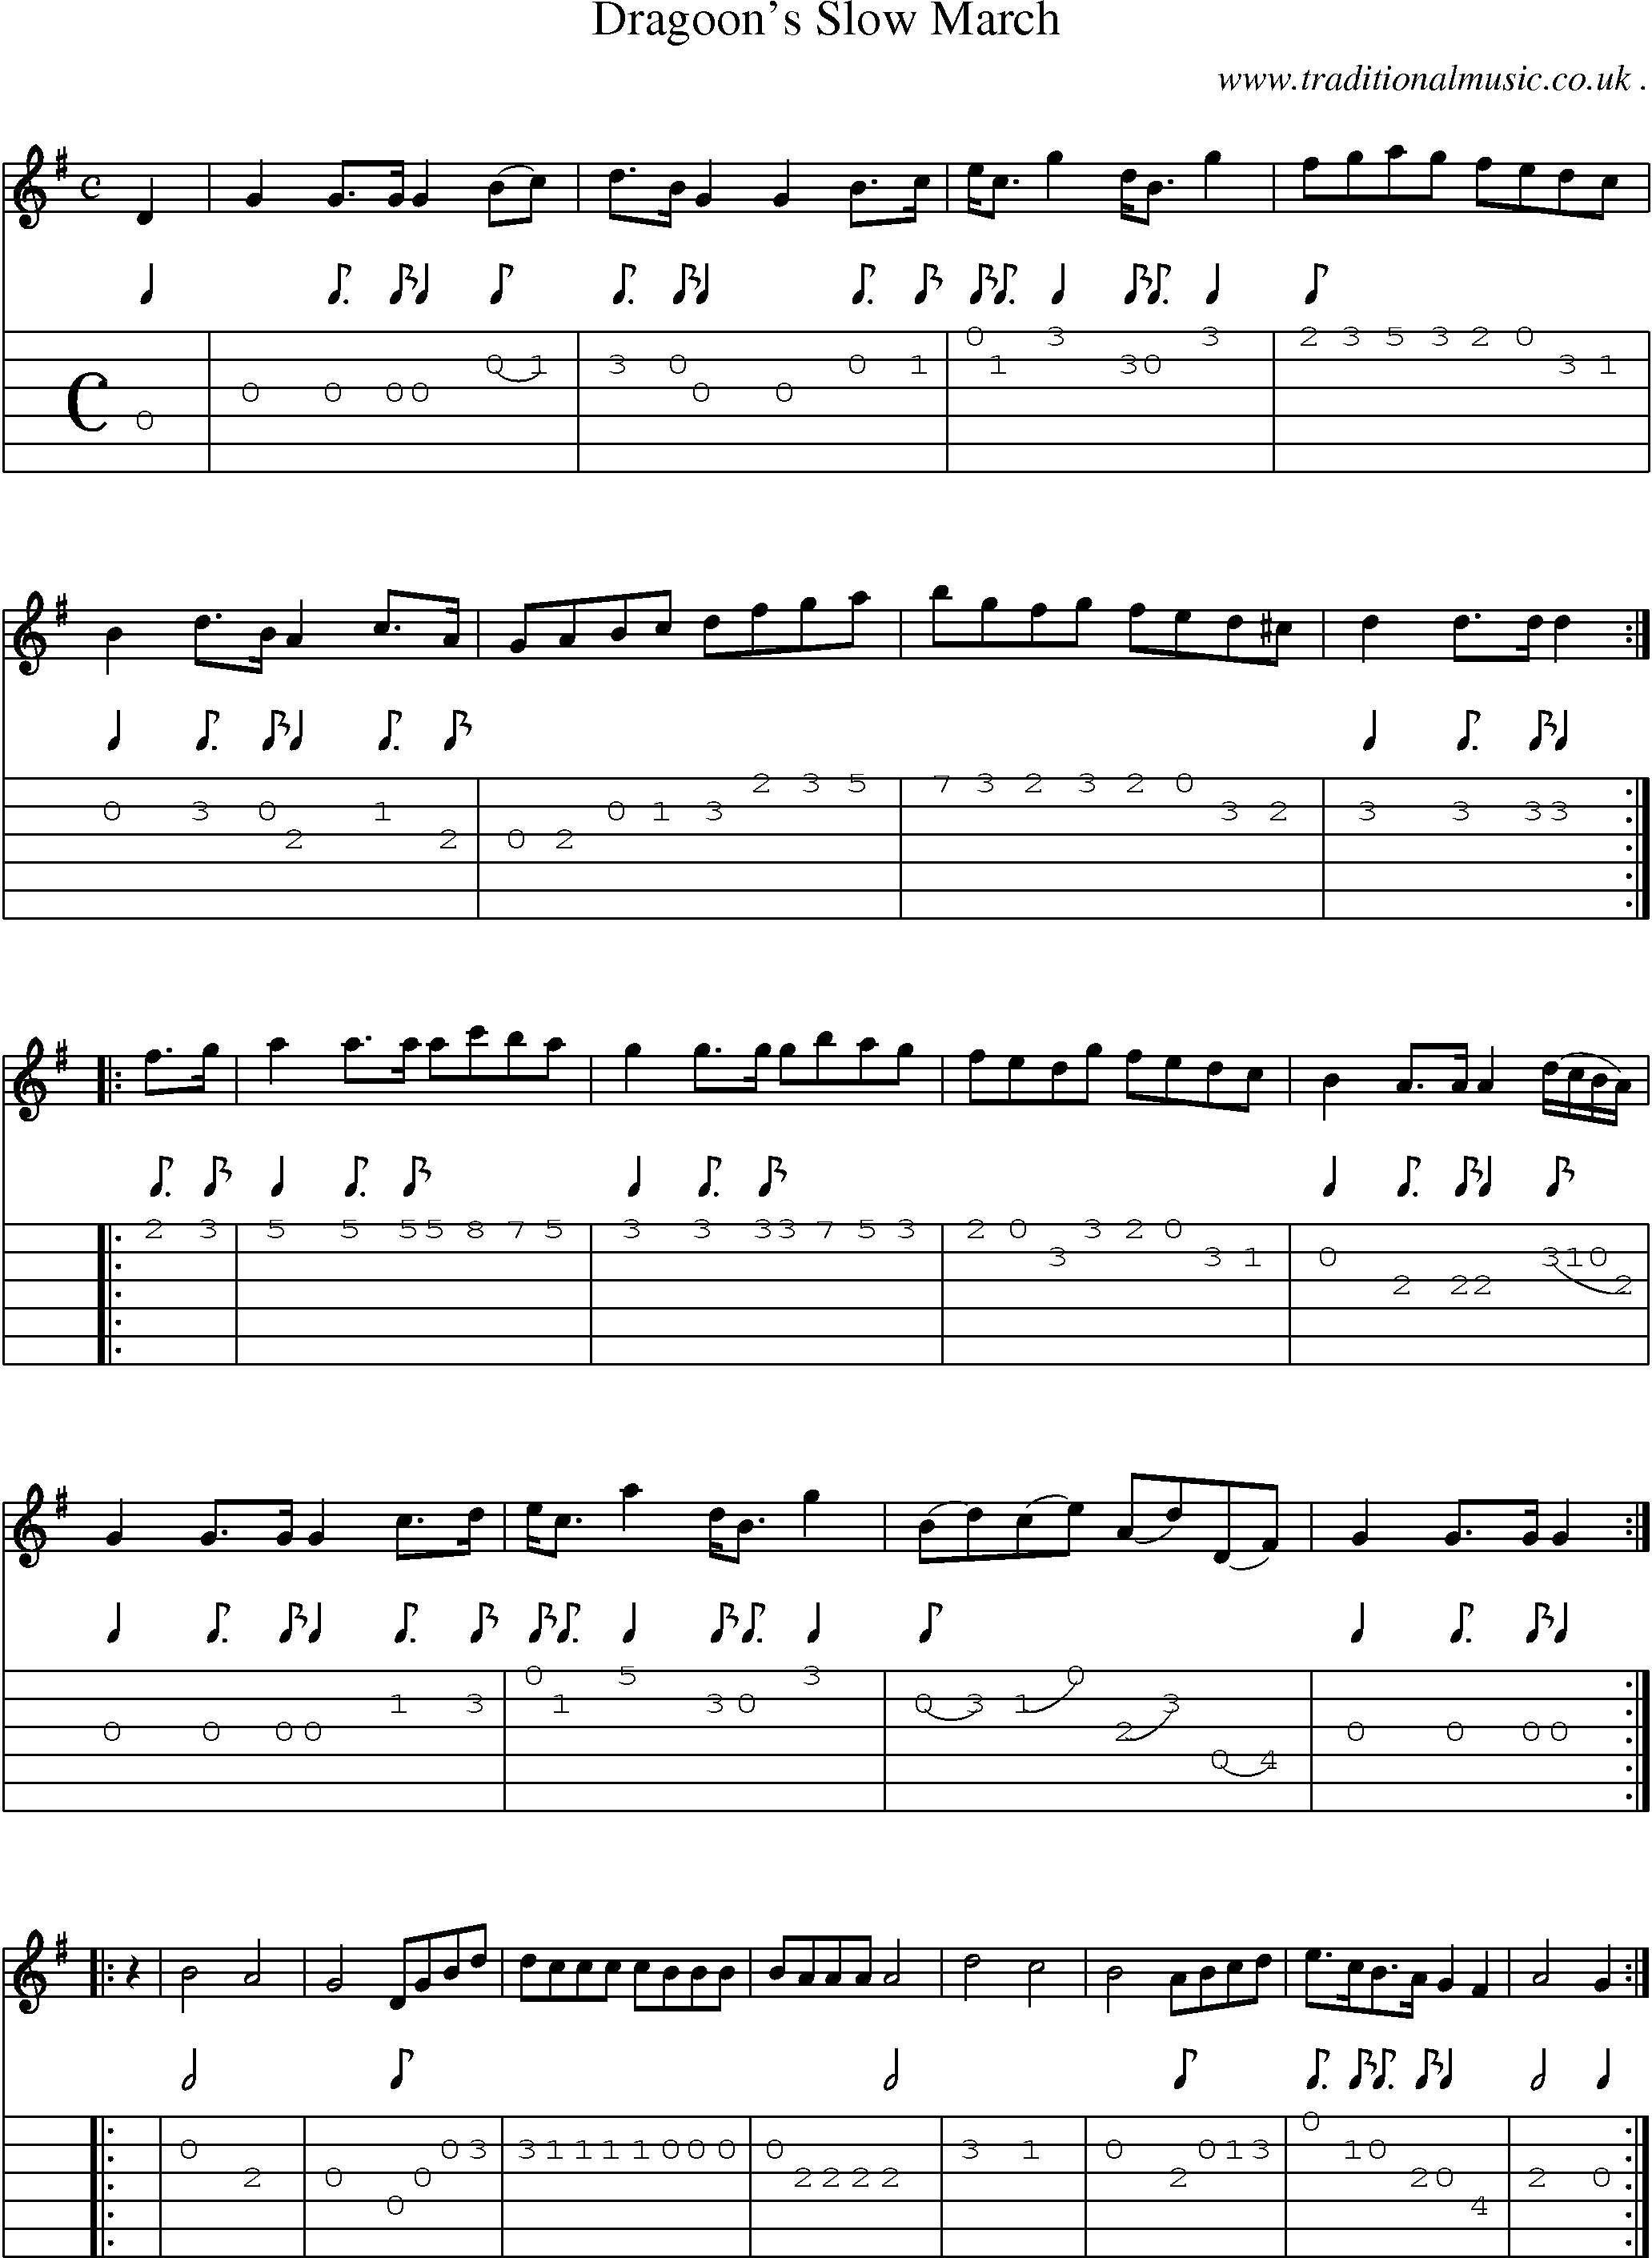 Sheet-Music and Guitar Tabs for Dragoons Slow March